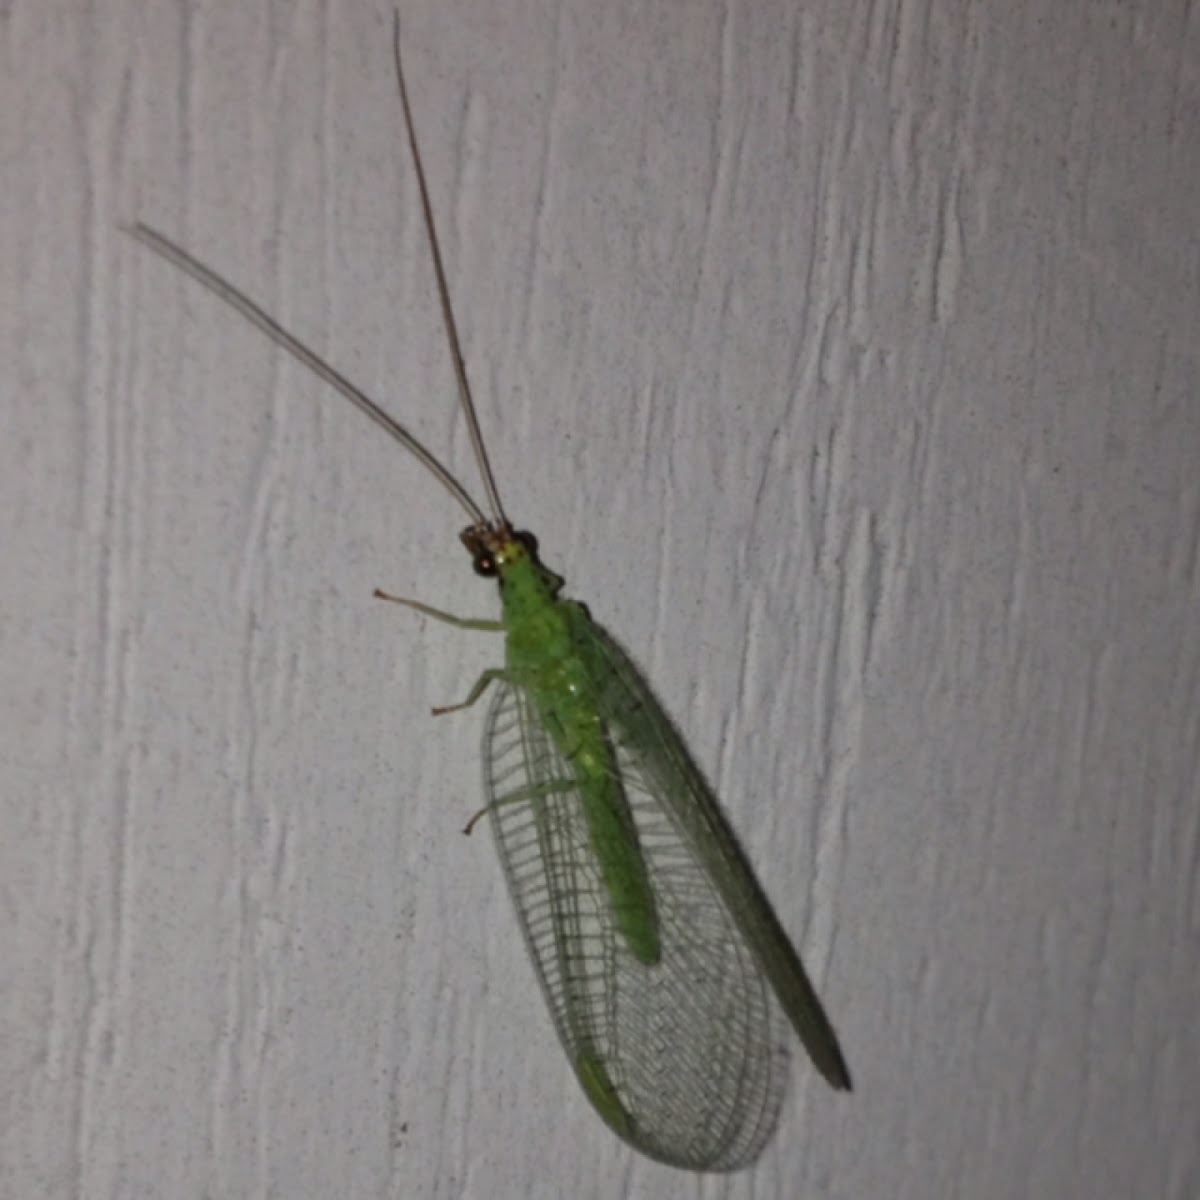 Golden-eyed Lacewing